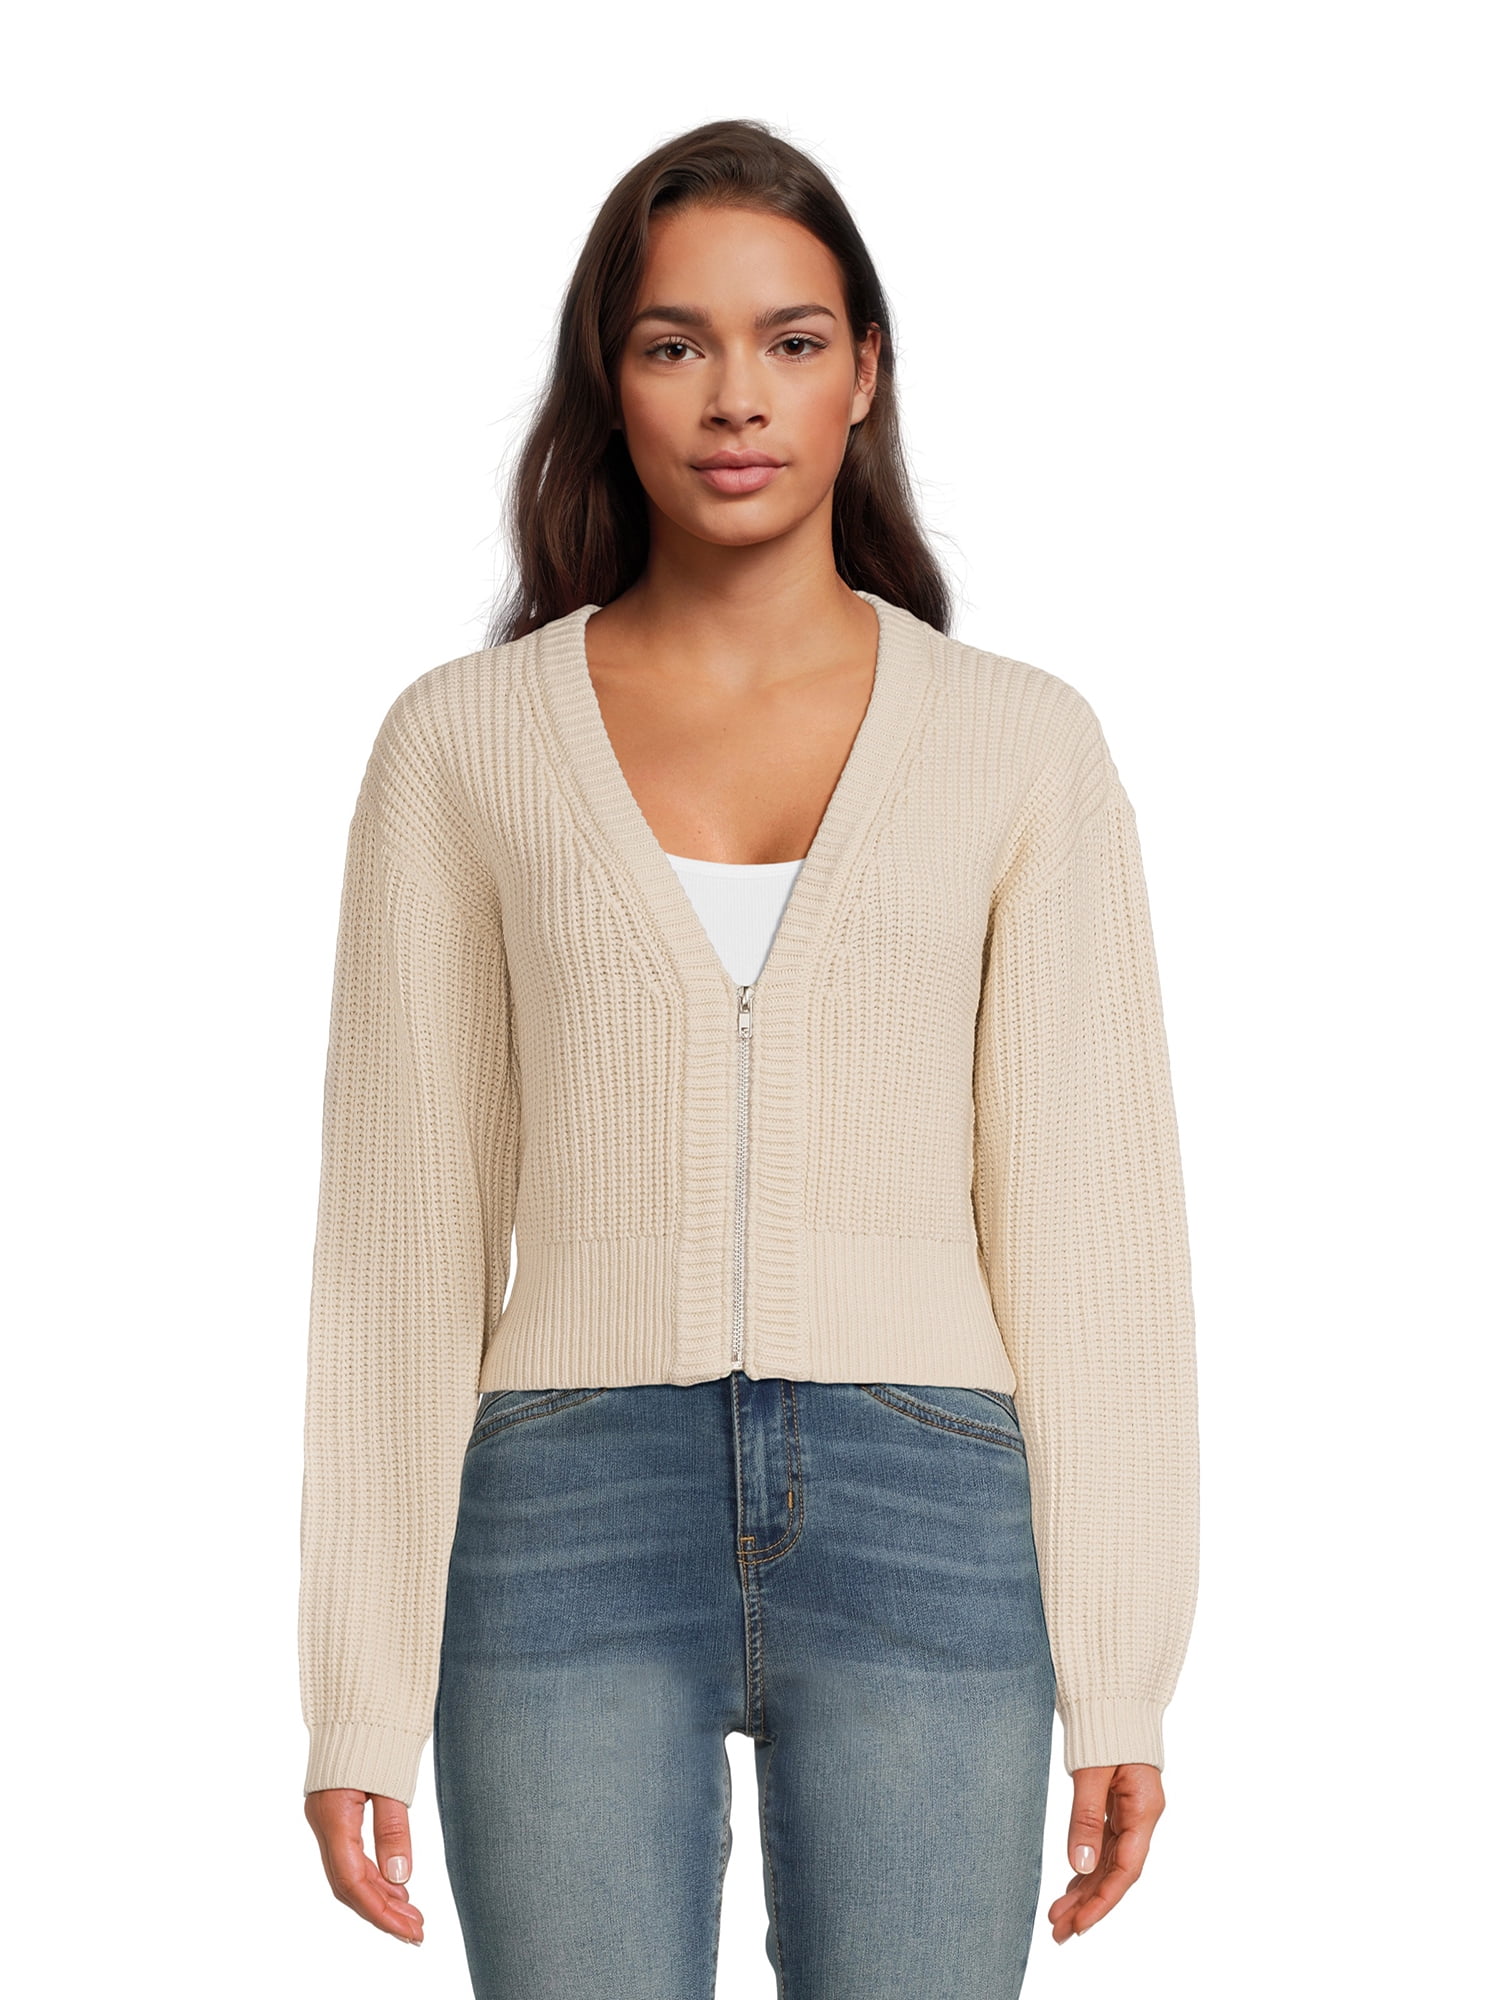 RD Style Women's Zip Front Cropped Cardigan Sweater, Sizes S-XXXL ...